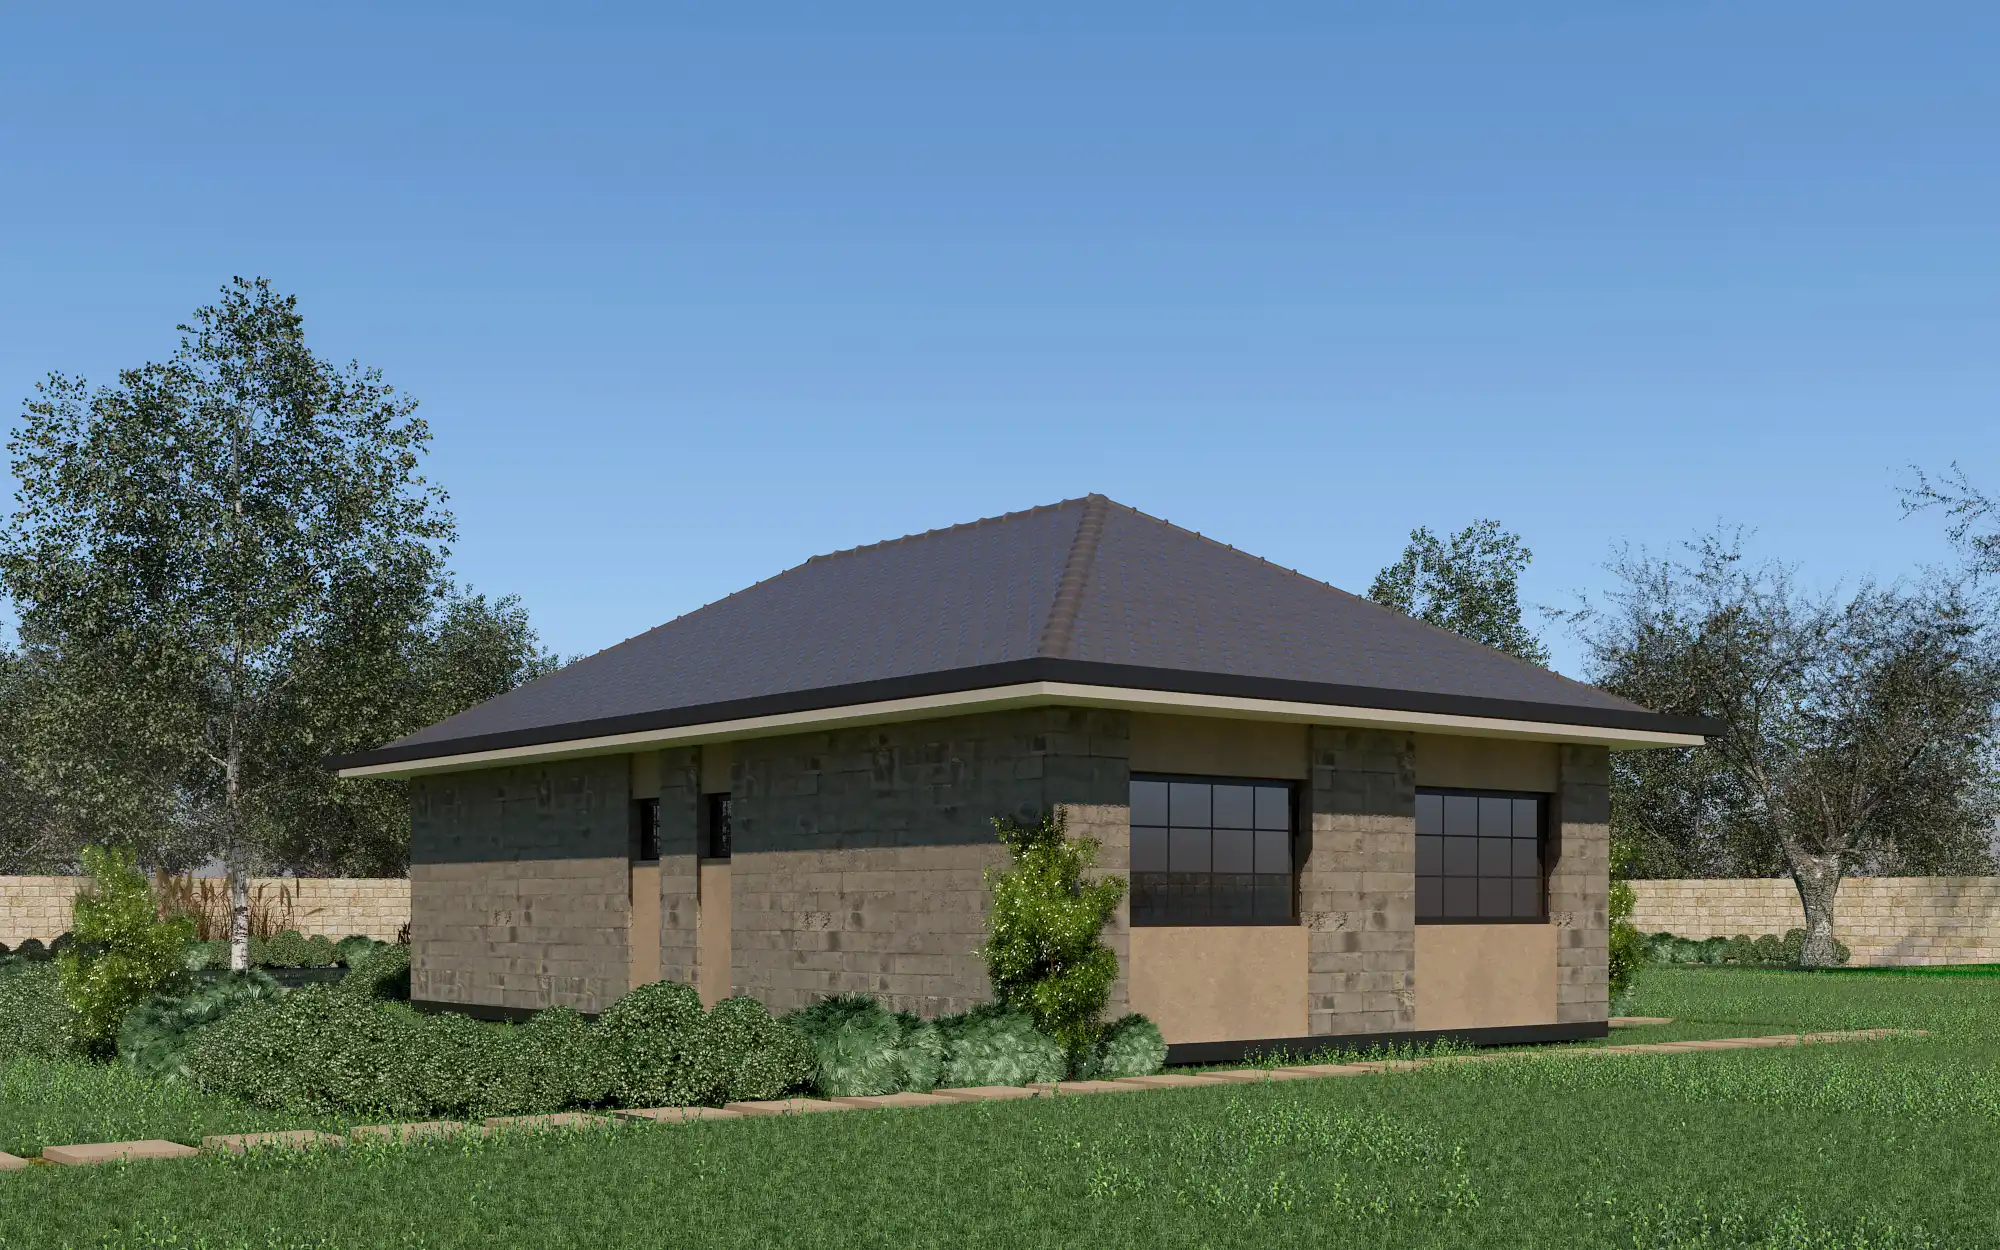 3 Bedroom Bungalow - ID 3181 - Rear from Inuua Tujenge house plans with 3 bedrooms and 1 bathrooms. ( bungalow )